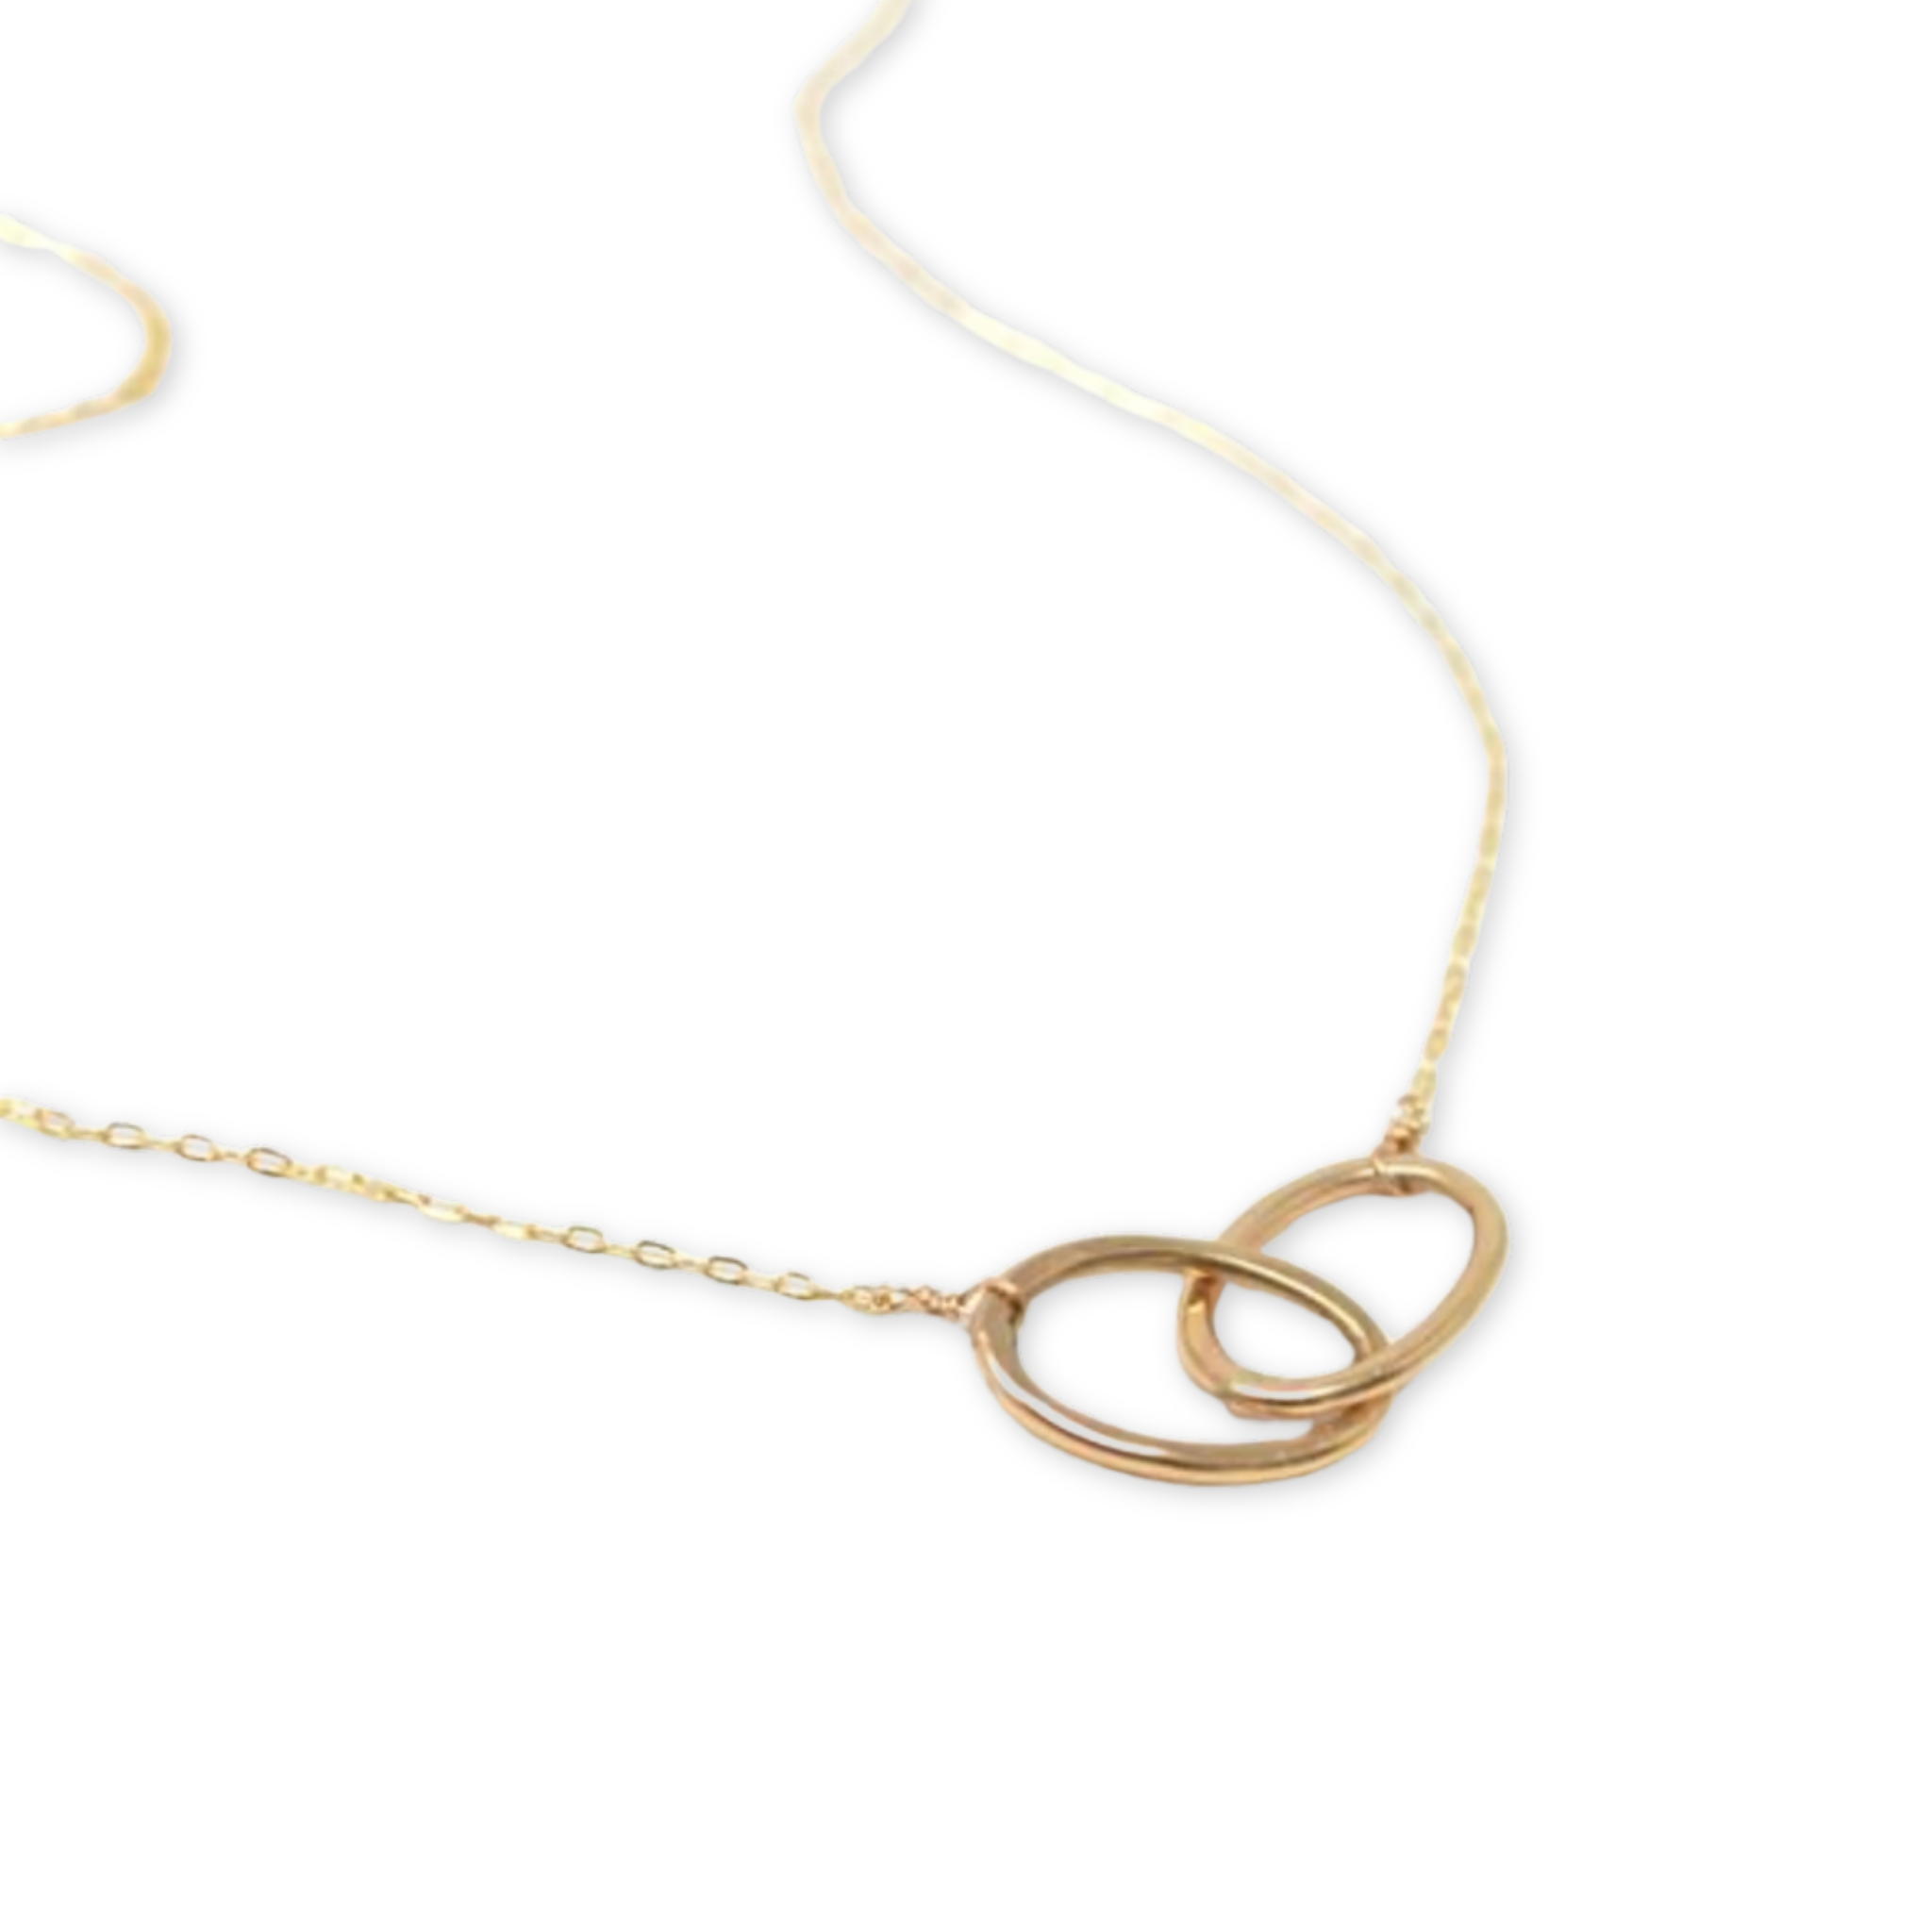 necklace with two interlocking ovals on a thin chain